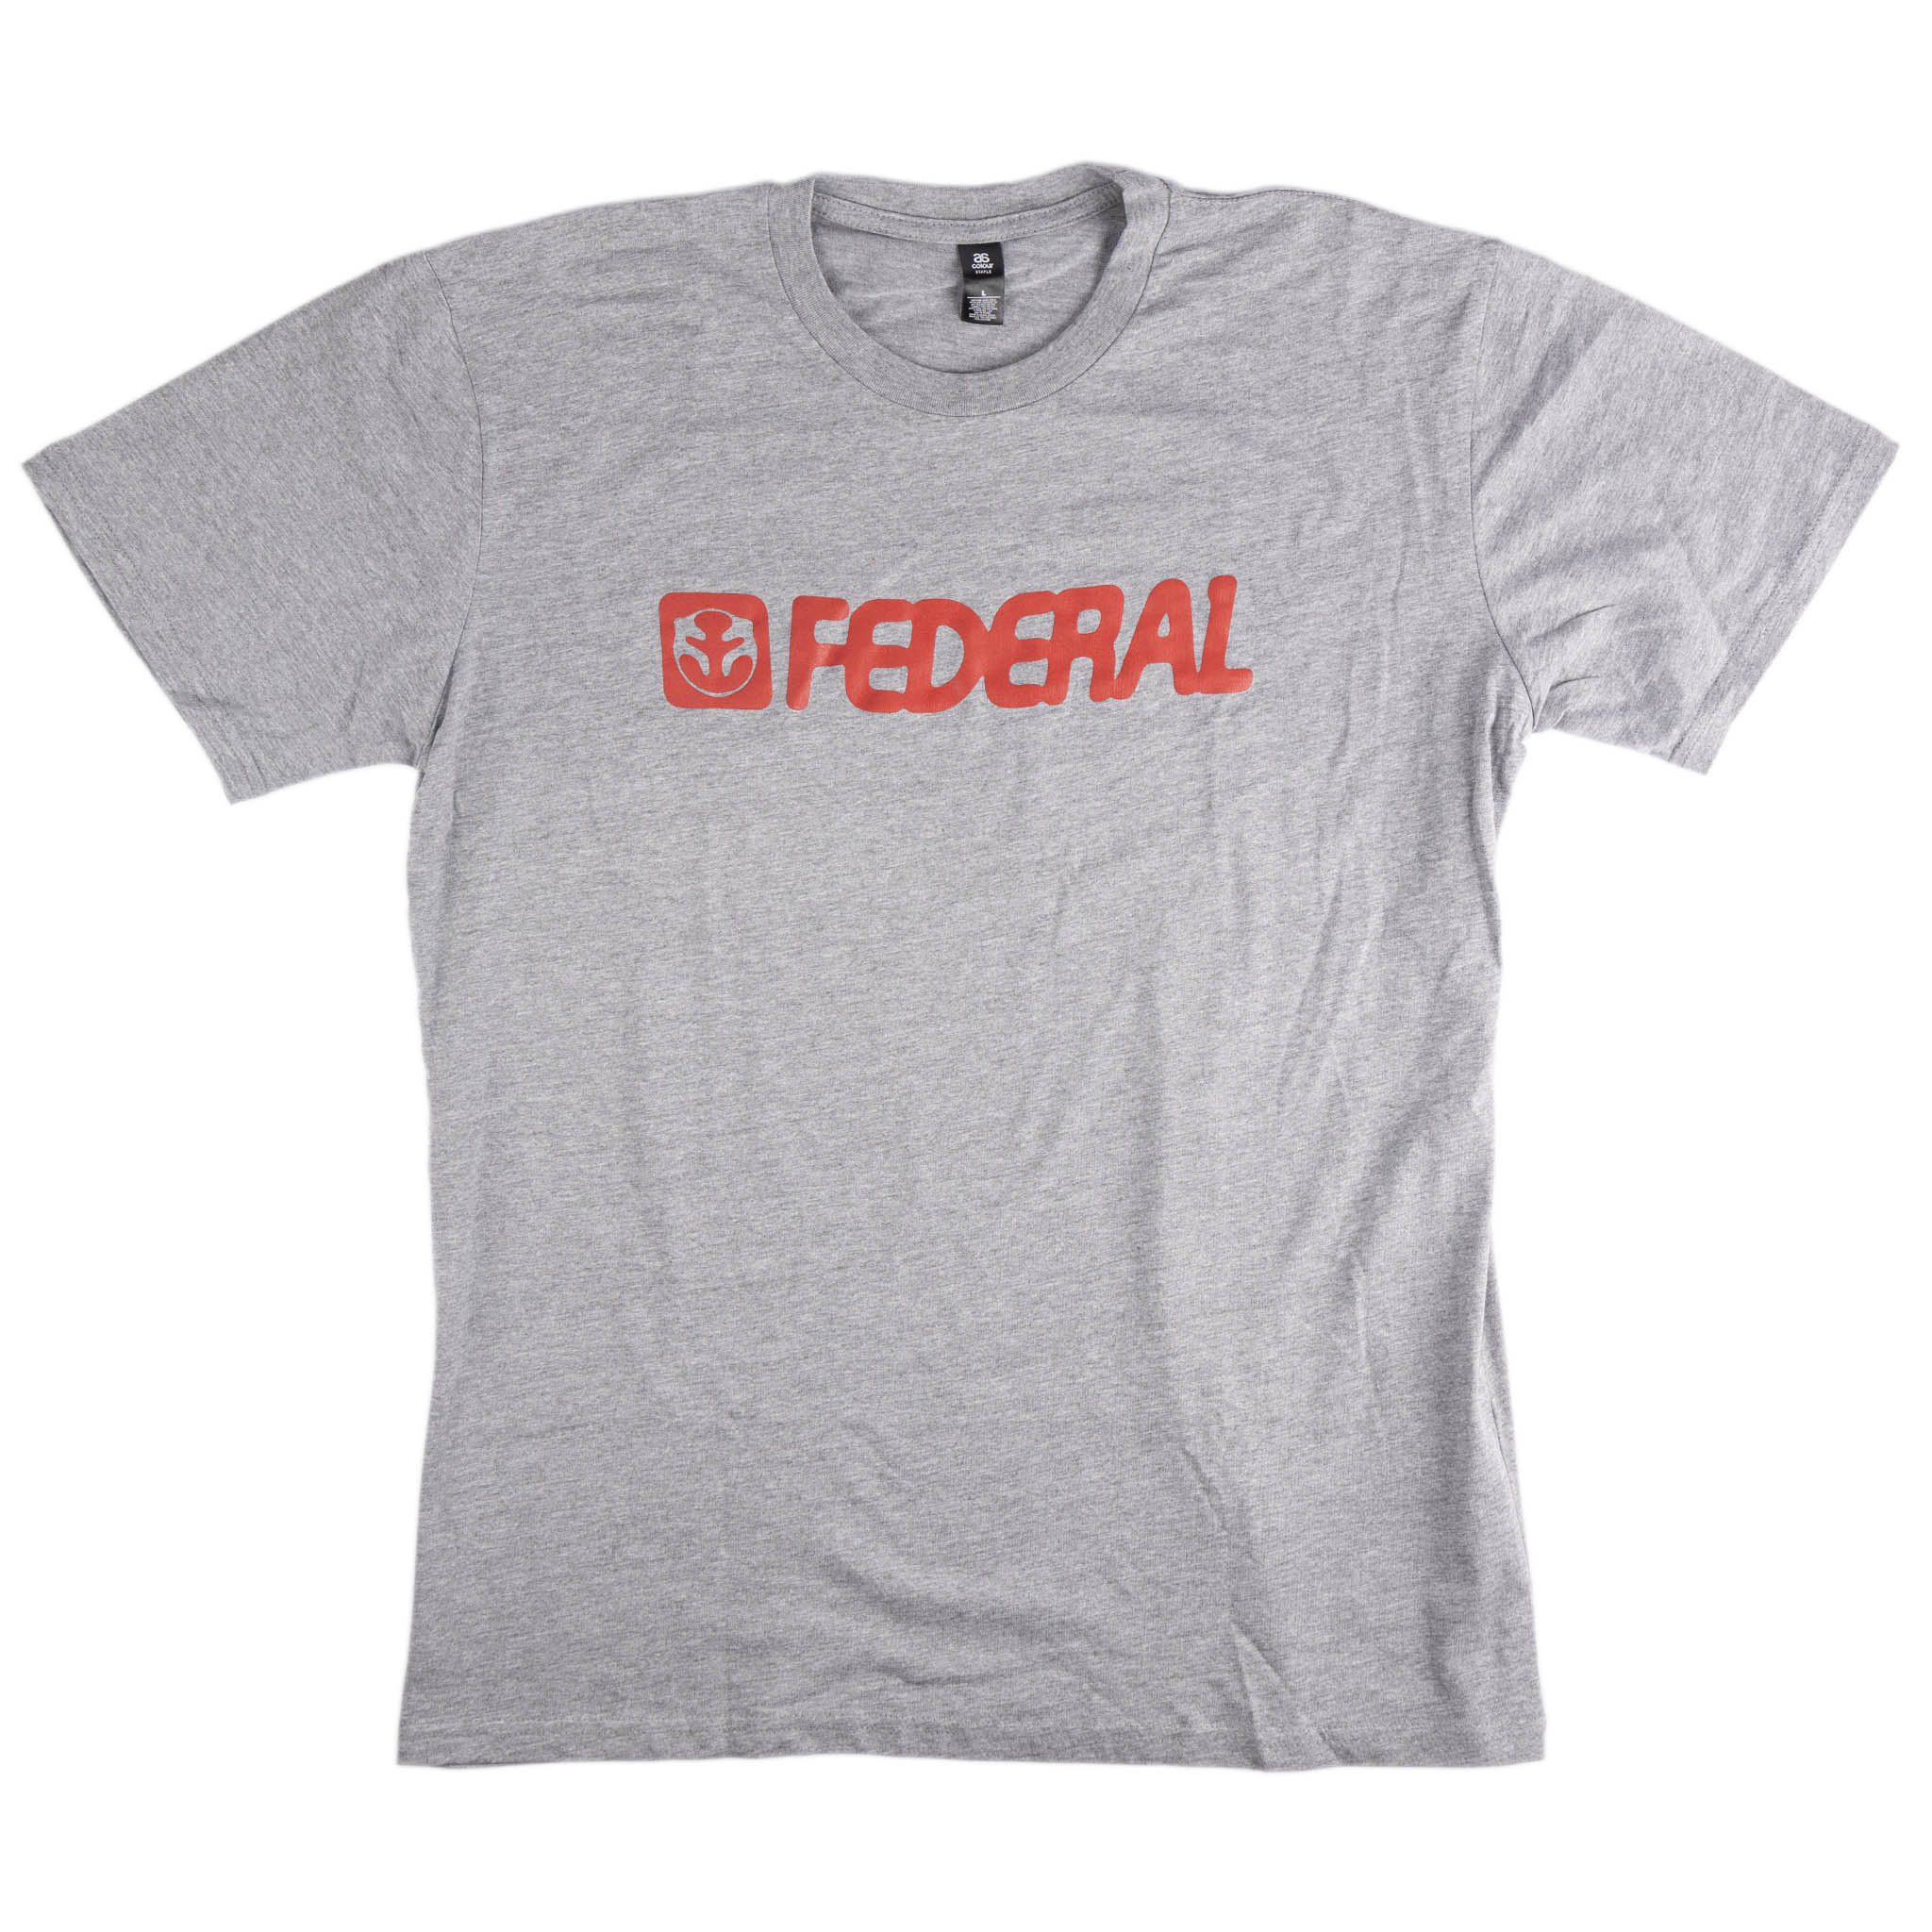 Federal Blown Out T-shirt - Grey Front | Federal BMX